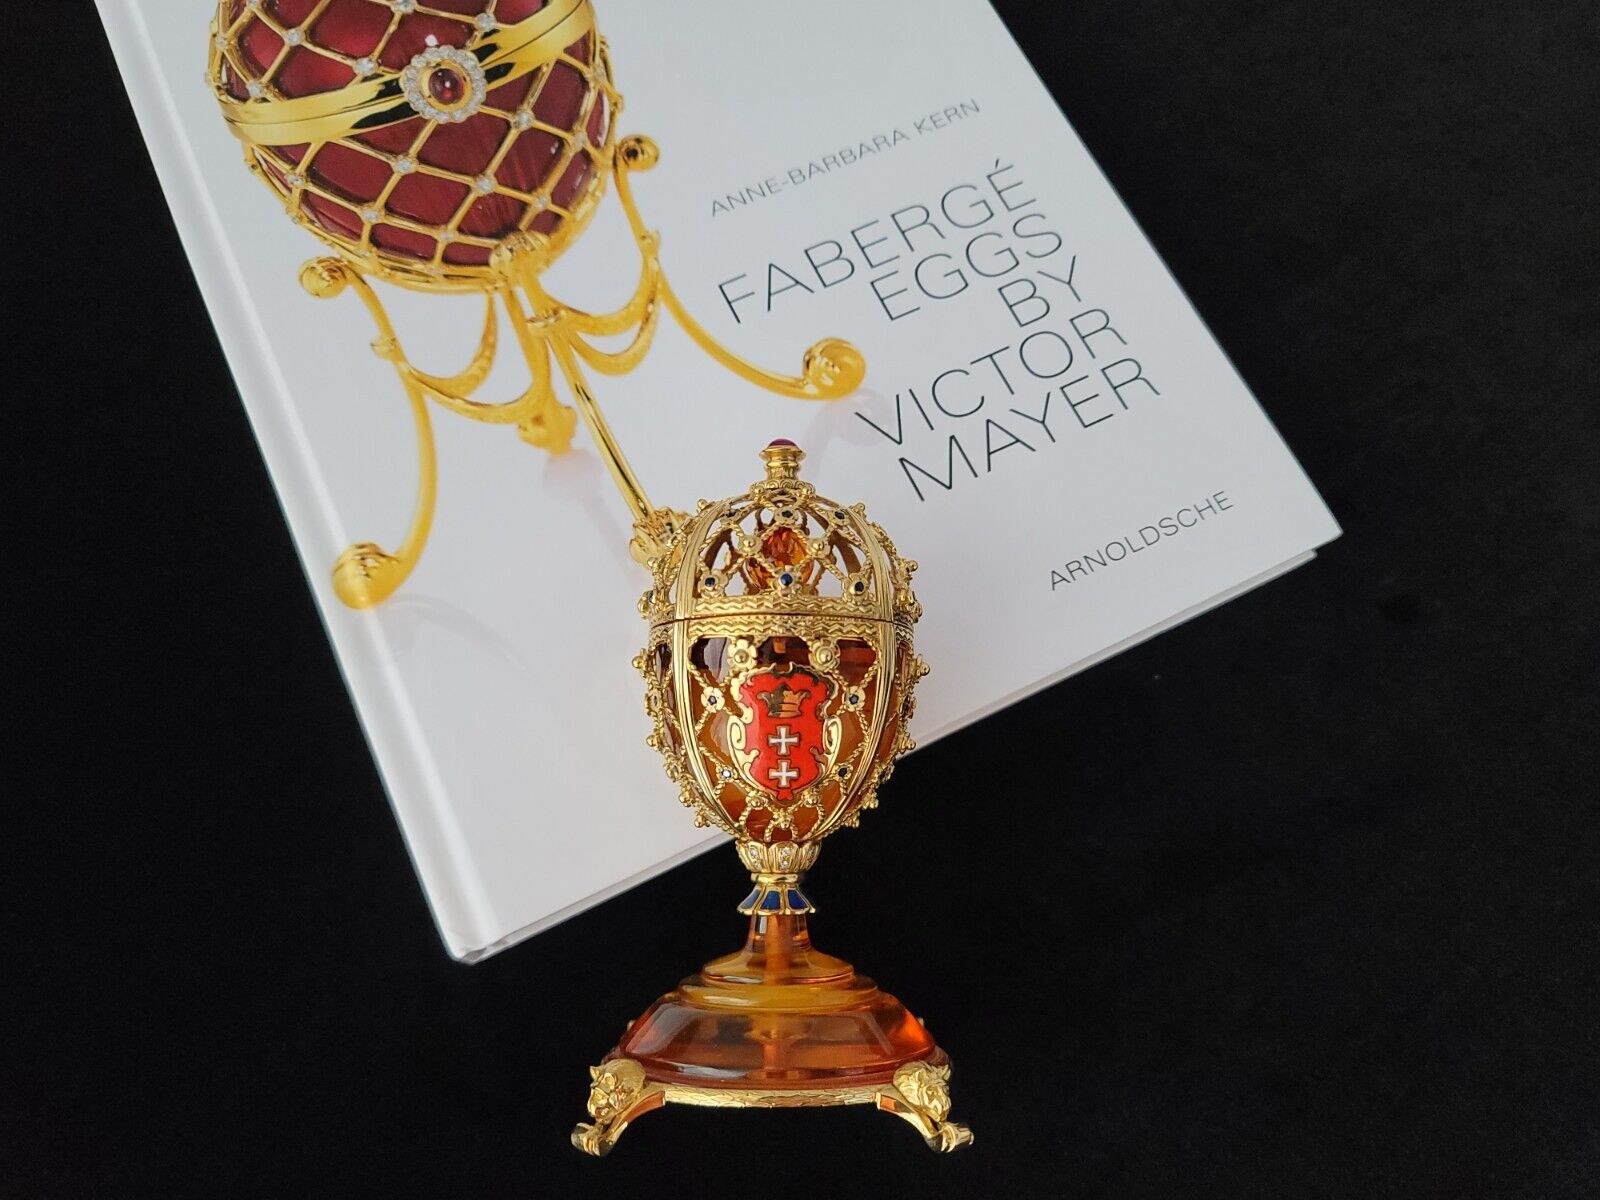 Faberge Egg 72 Gold 18K Danzig Amber Victor Mayer Germany Enamel Fabergé Jewelry